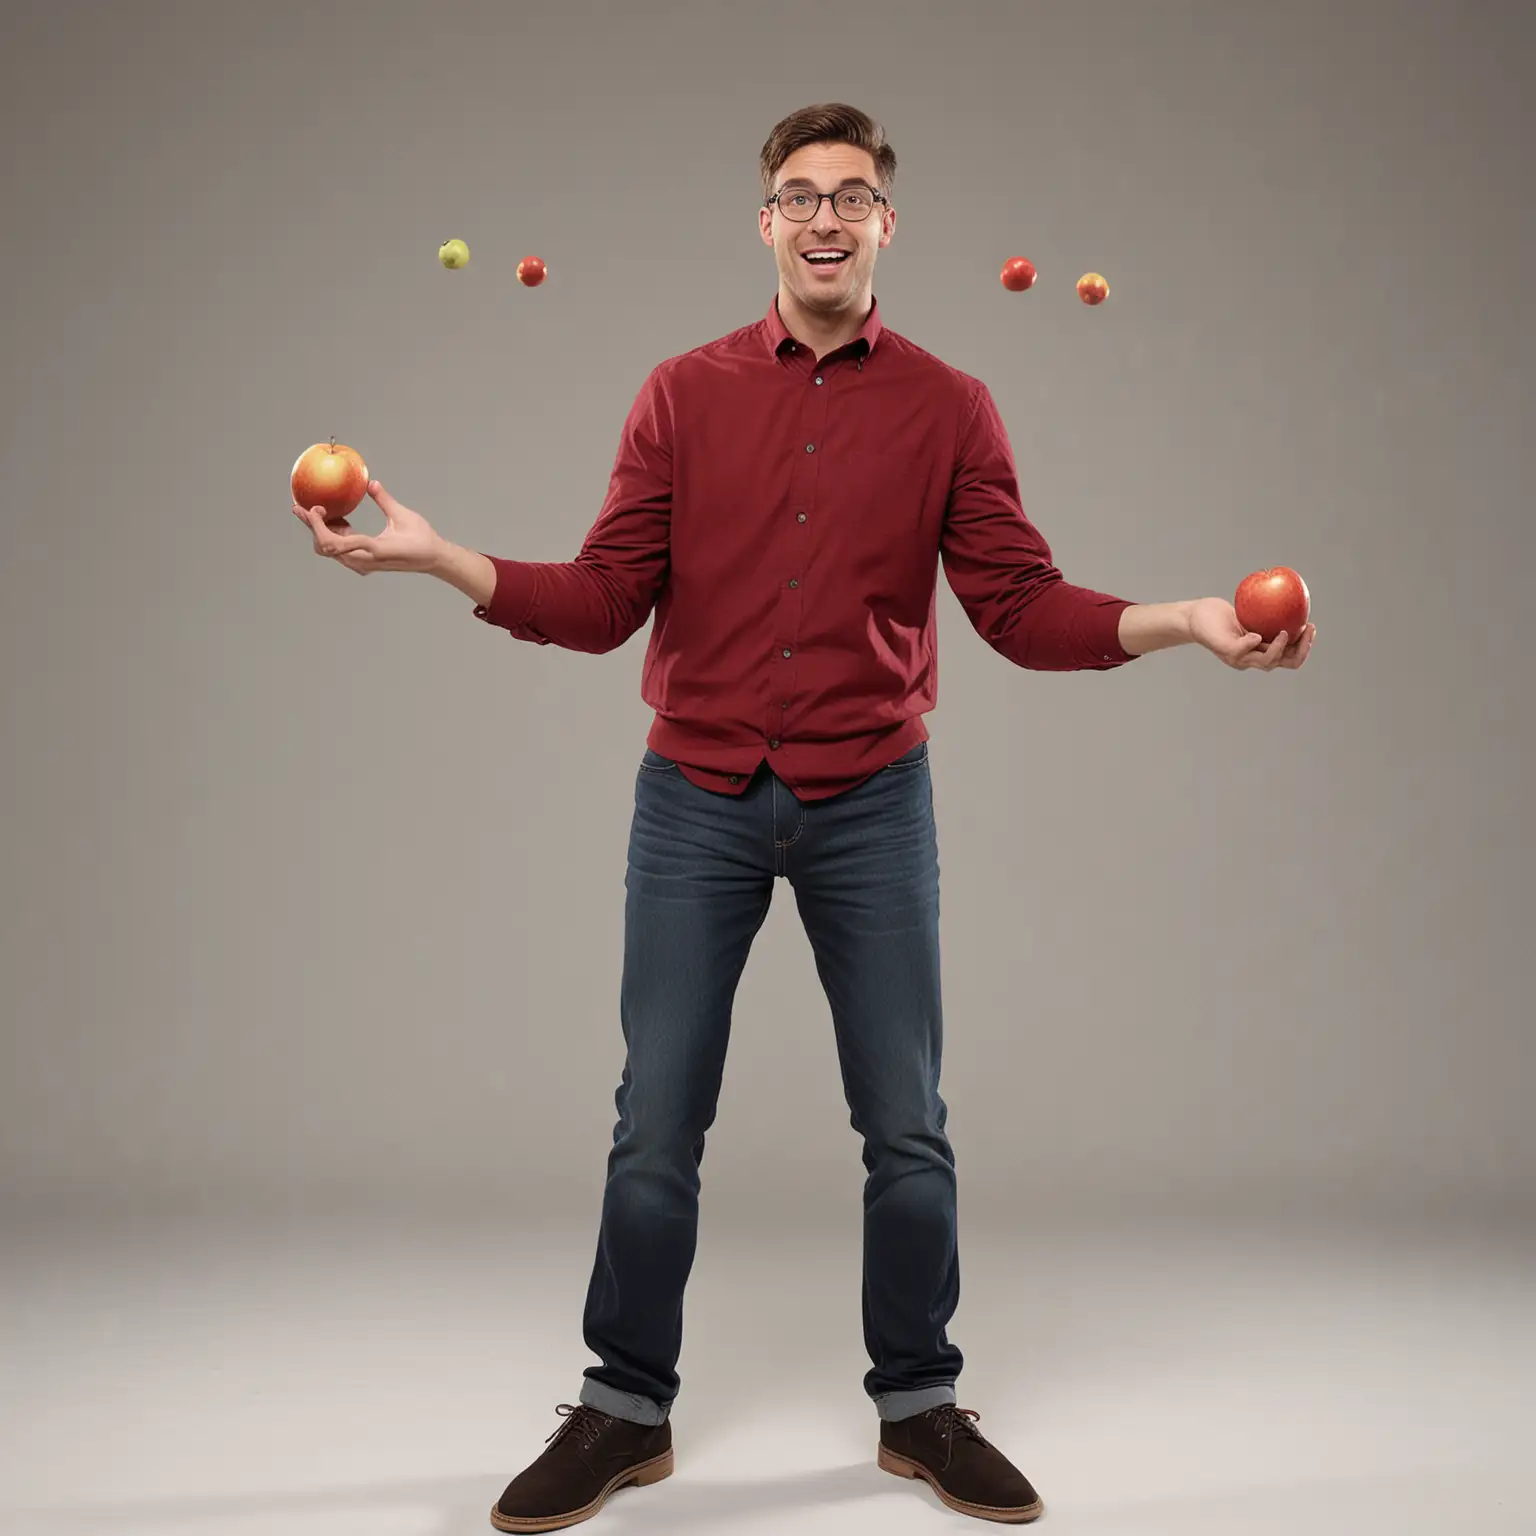 Visuals: Host attempting to juggle apples and dropping them comically